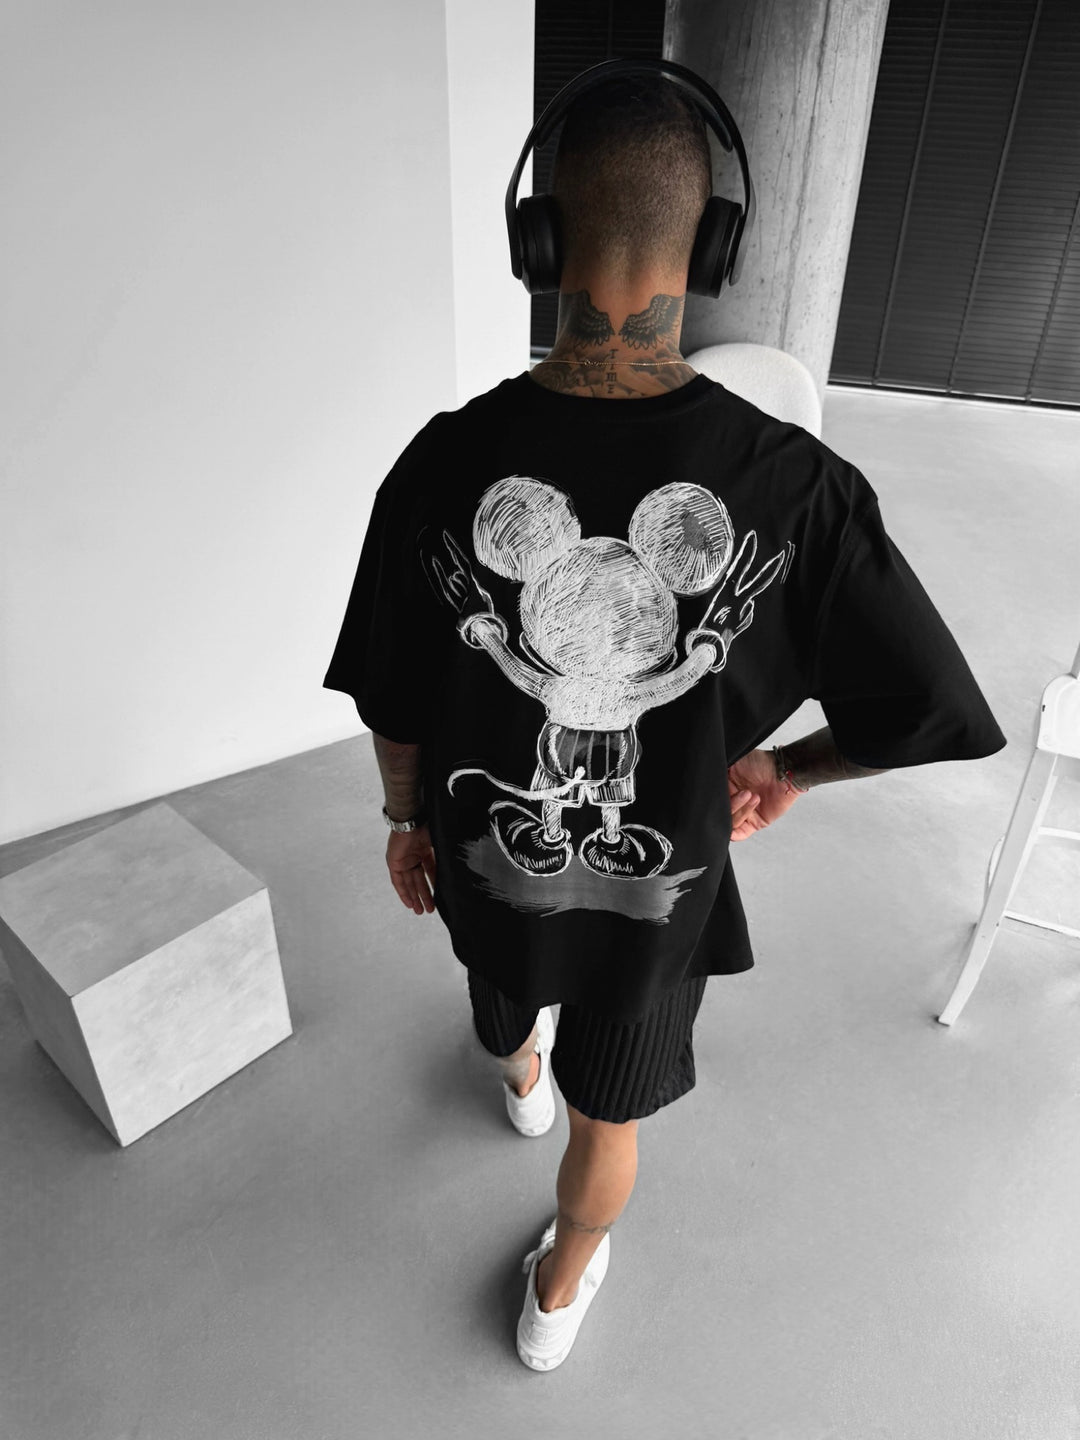 Oversize Mouse T-shirt - Black and White